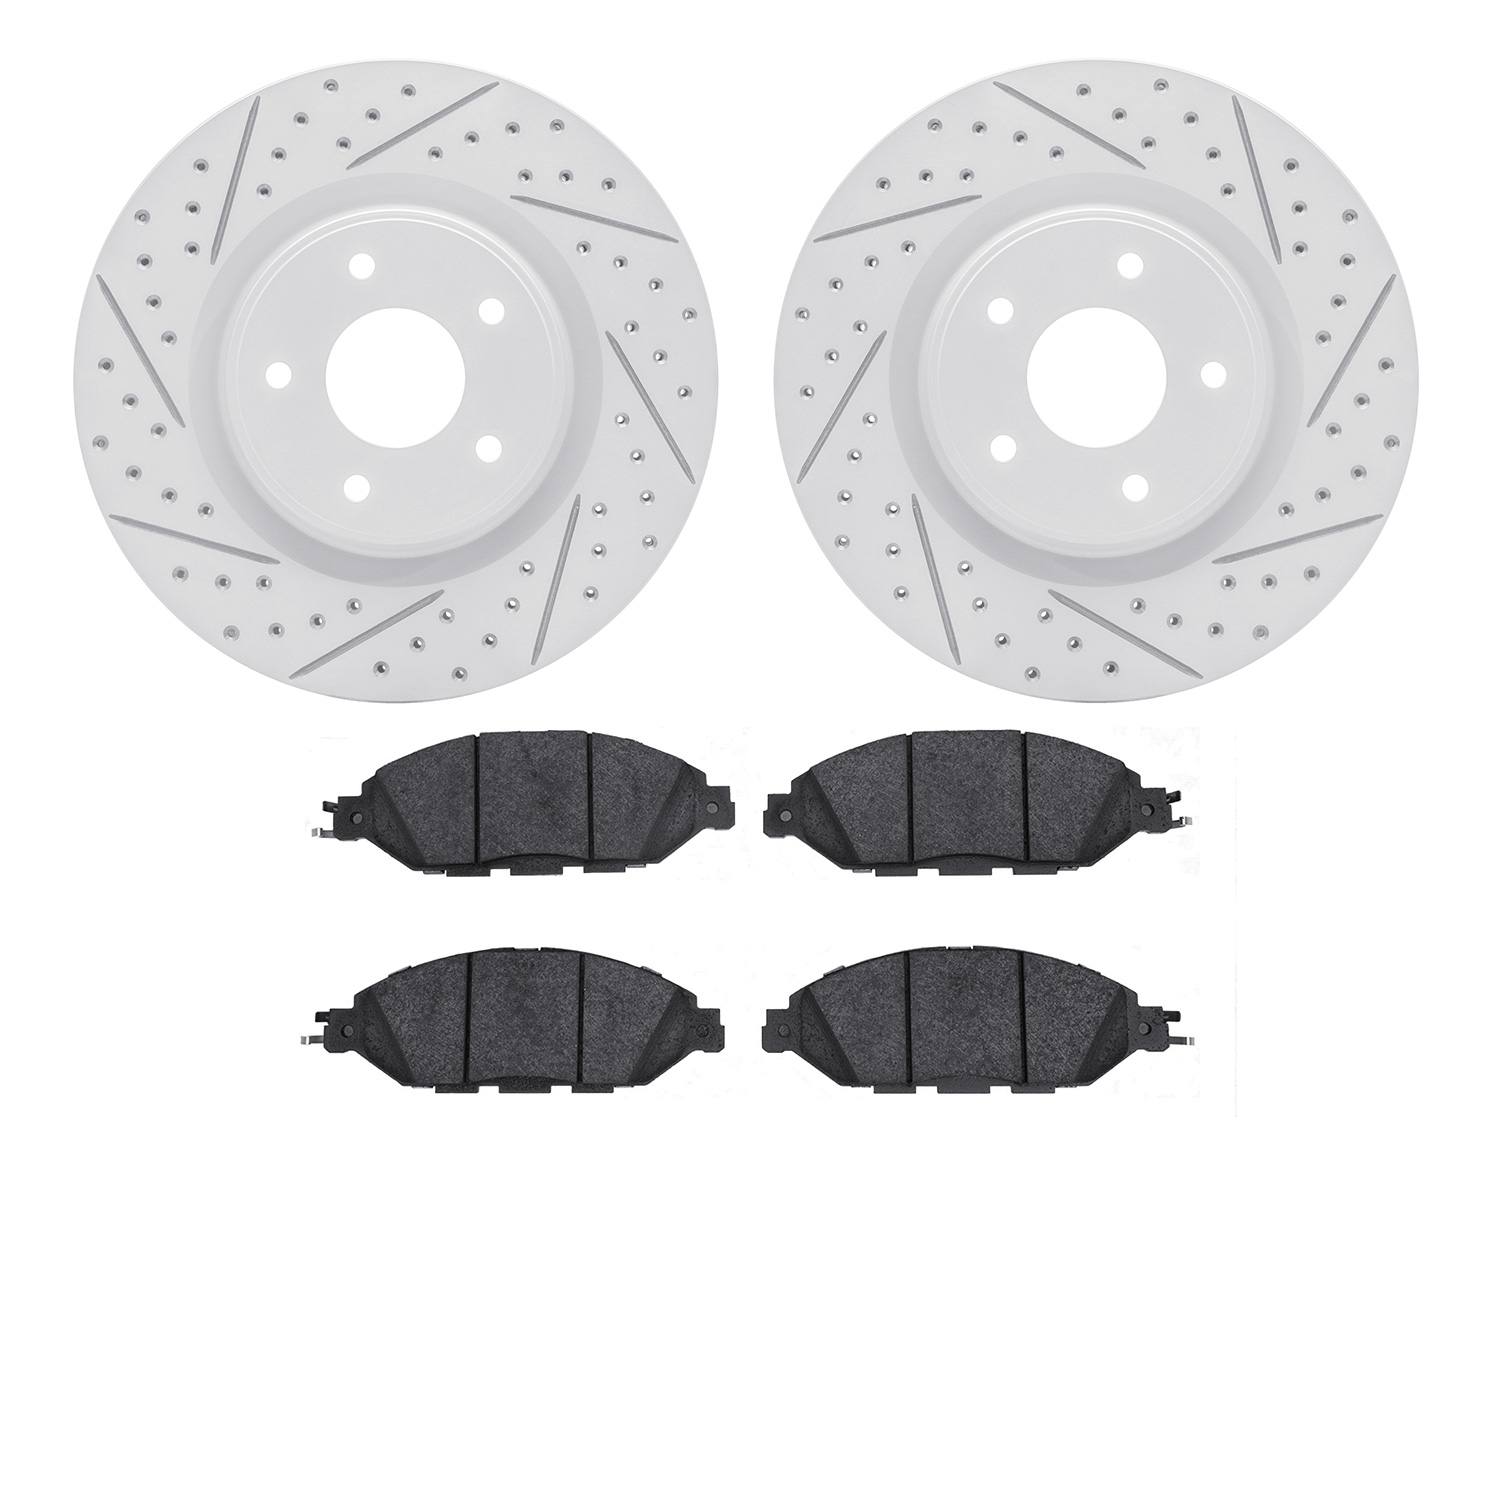 2502-67125 Geoperformance Drilled/Slotted Rotors w/5000 Advanced Brake Pads Kit, Fits Select Infiniti/Nissan, Position: Front